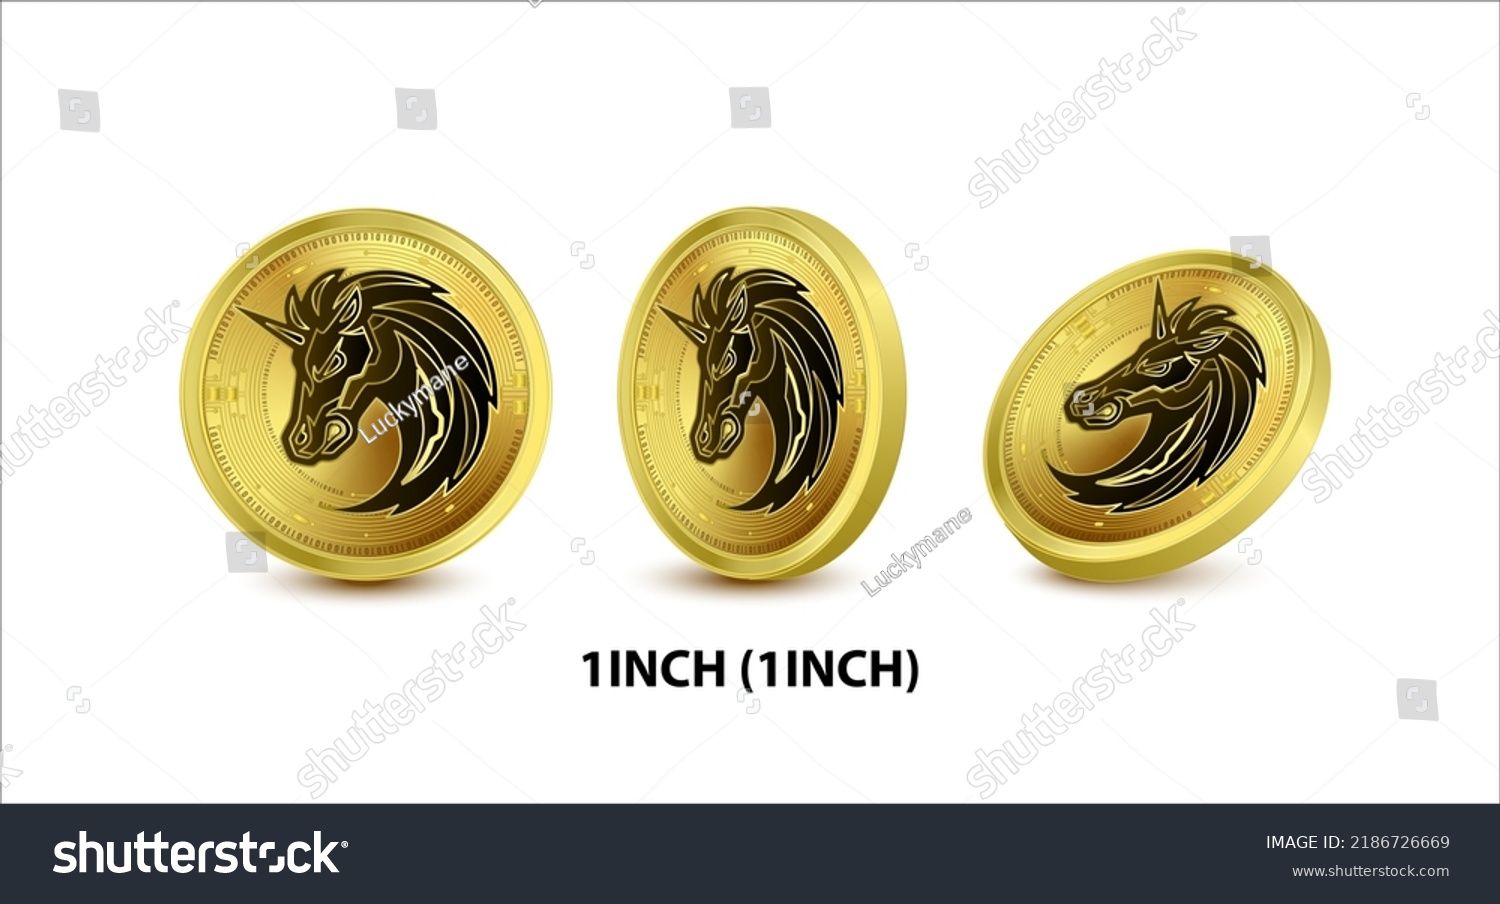 SVG of Set of Gold coin 1inch (1INCH) Vector illustration. Digital currency. Cryptocurrency Golden coins with bitcoin, ripple ethereum symbol isolated on white background. 3D isometric Physical coins. svg